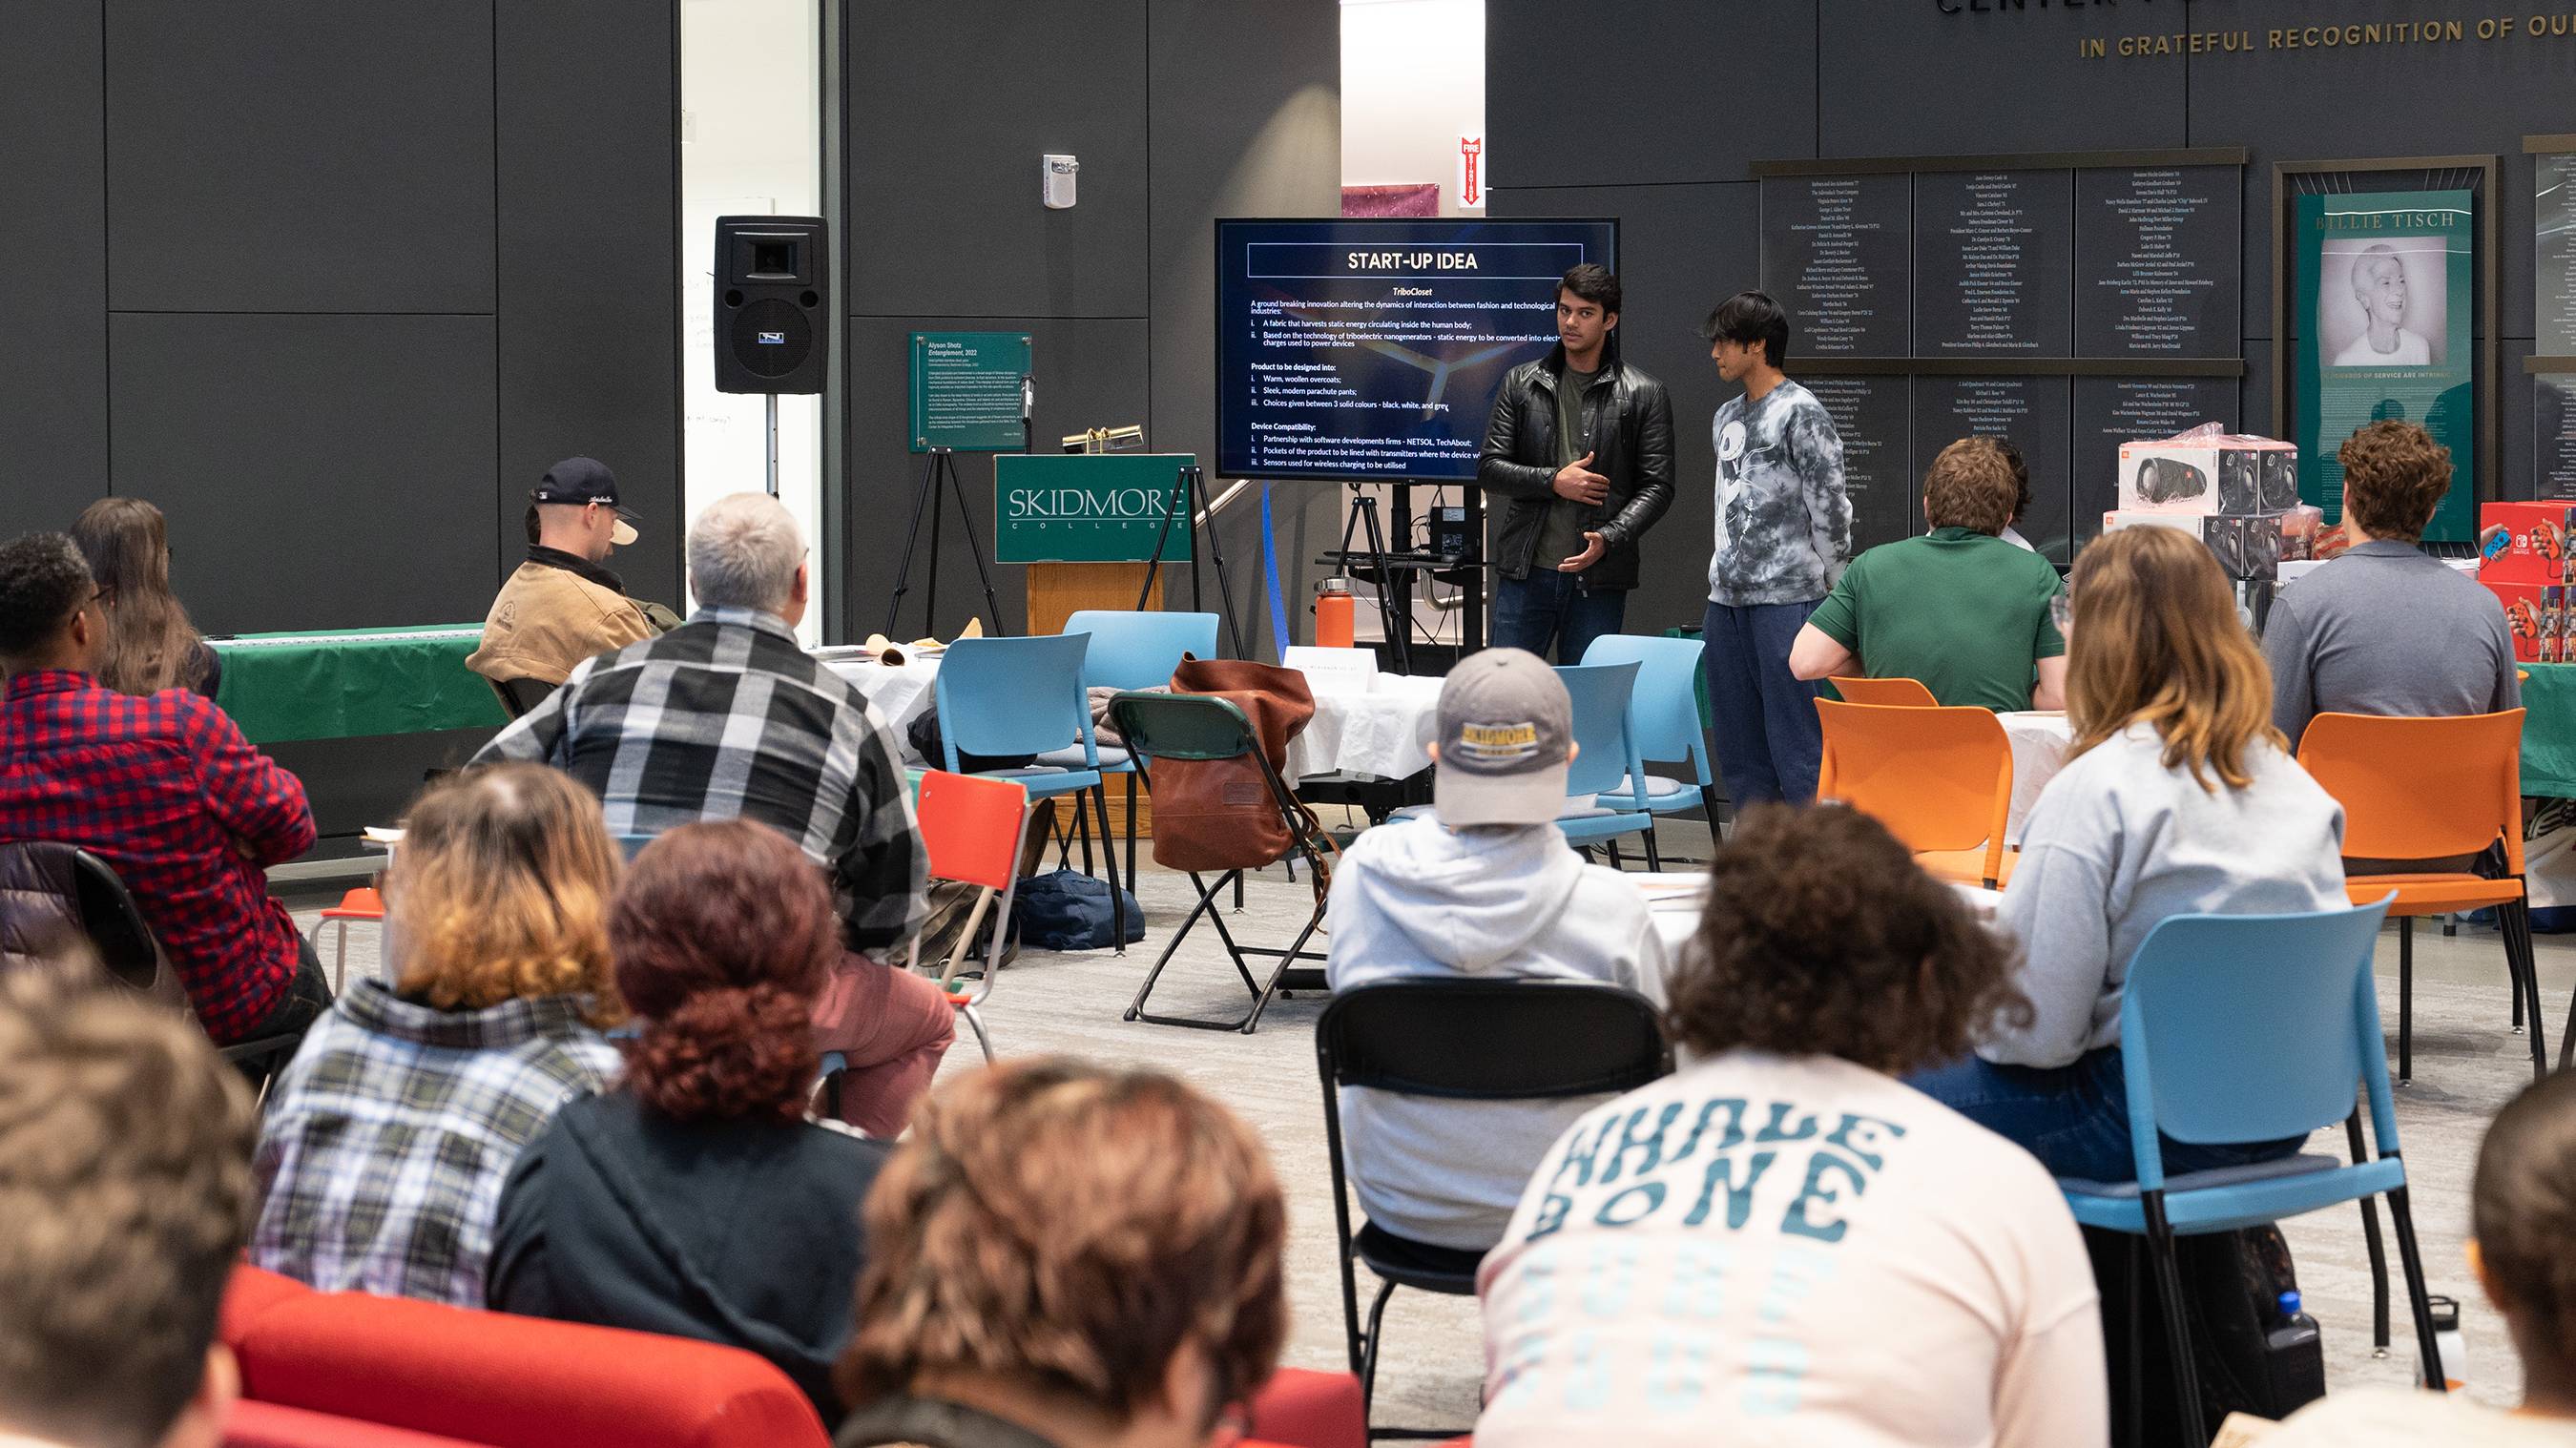 Muhammad Salim ’27 and Yash Manandhar ’27 present their idea, Tribocloset, in the Billie Tisch Center for Integrated Sciences. A crowd can be seen watching.